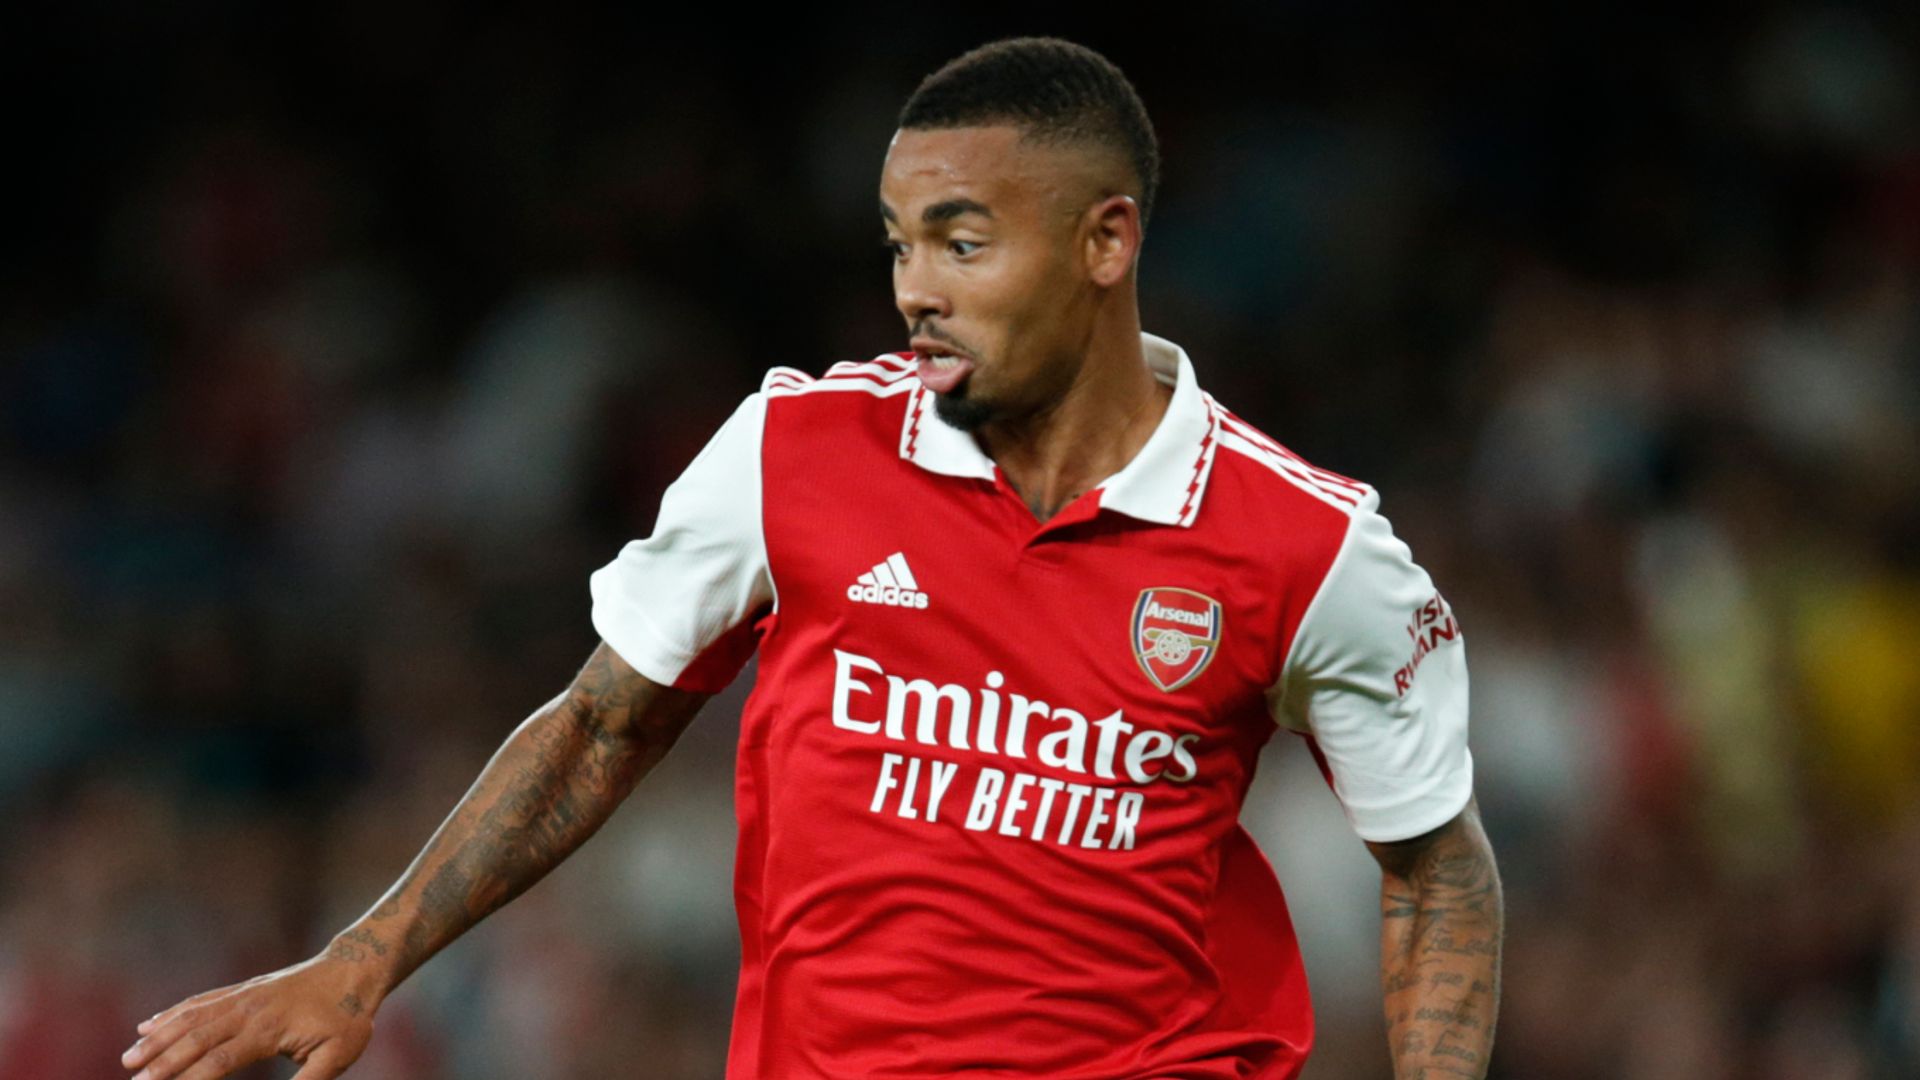 Arsenal trio left out of Brazil's World Cup warm-up squad